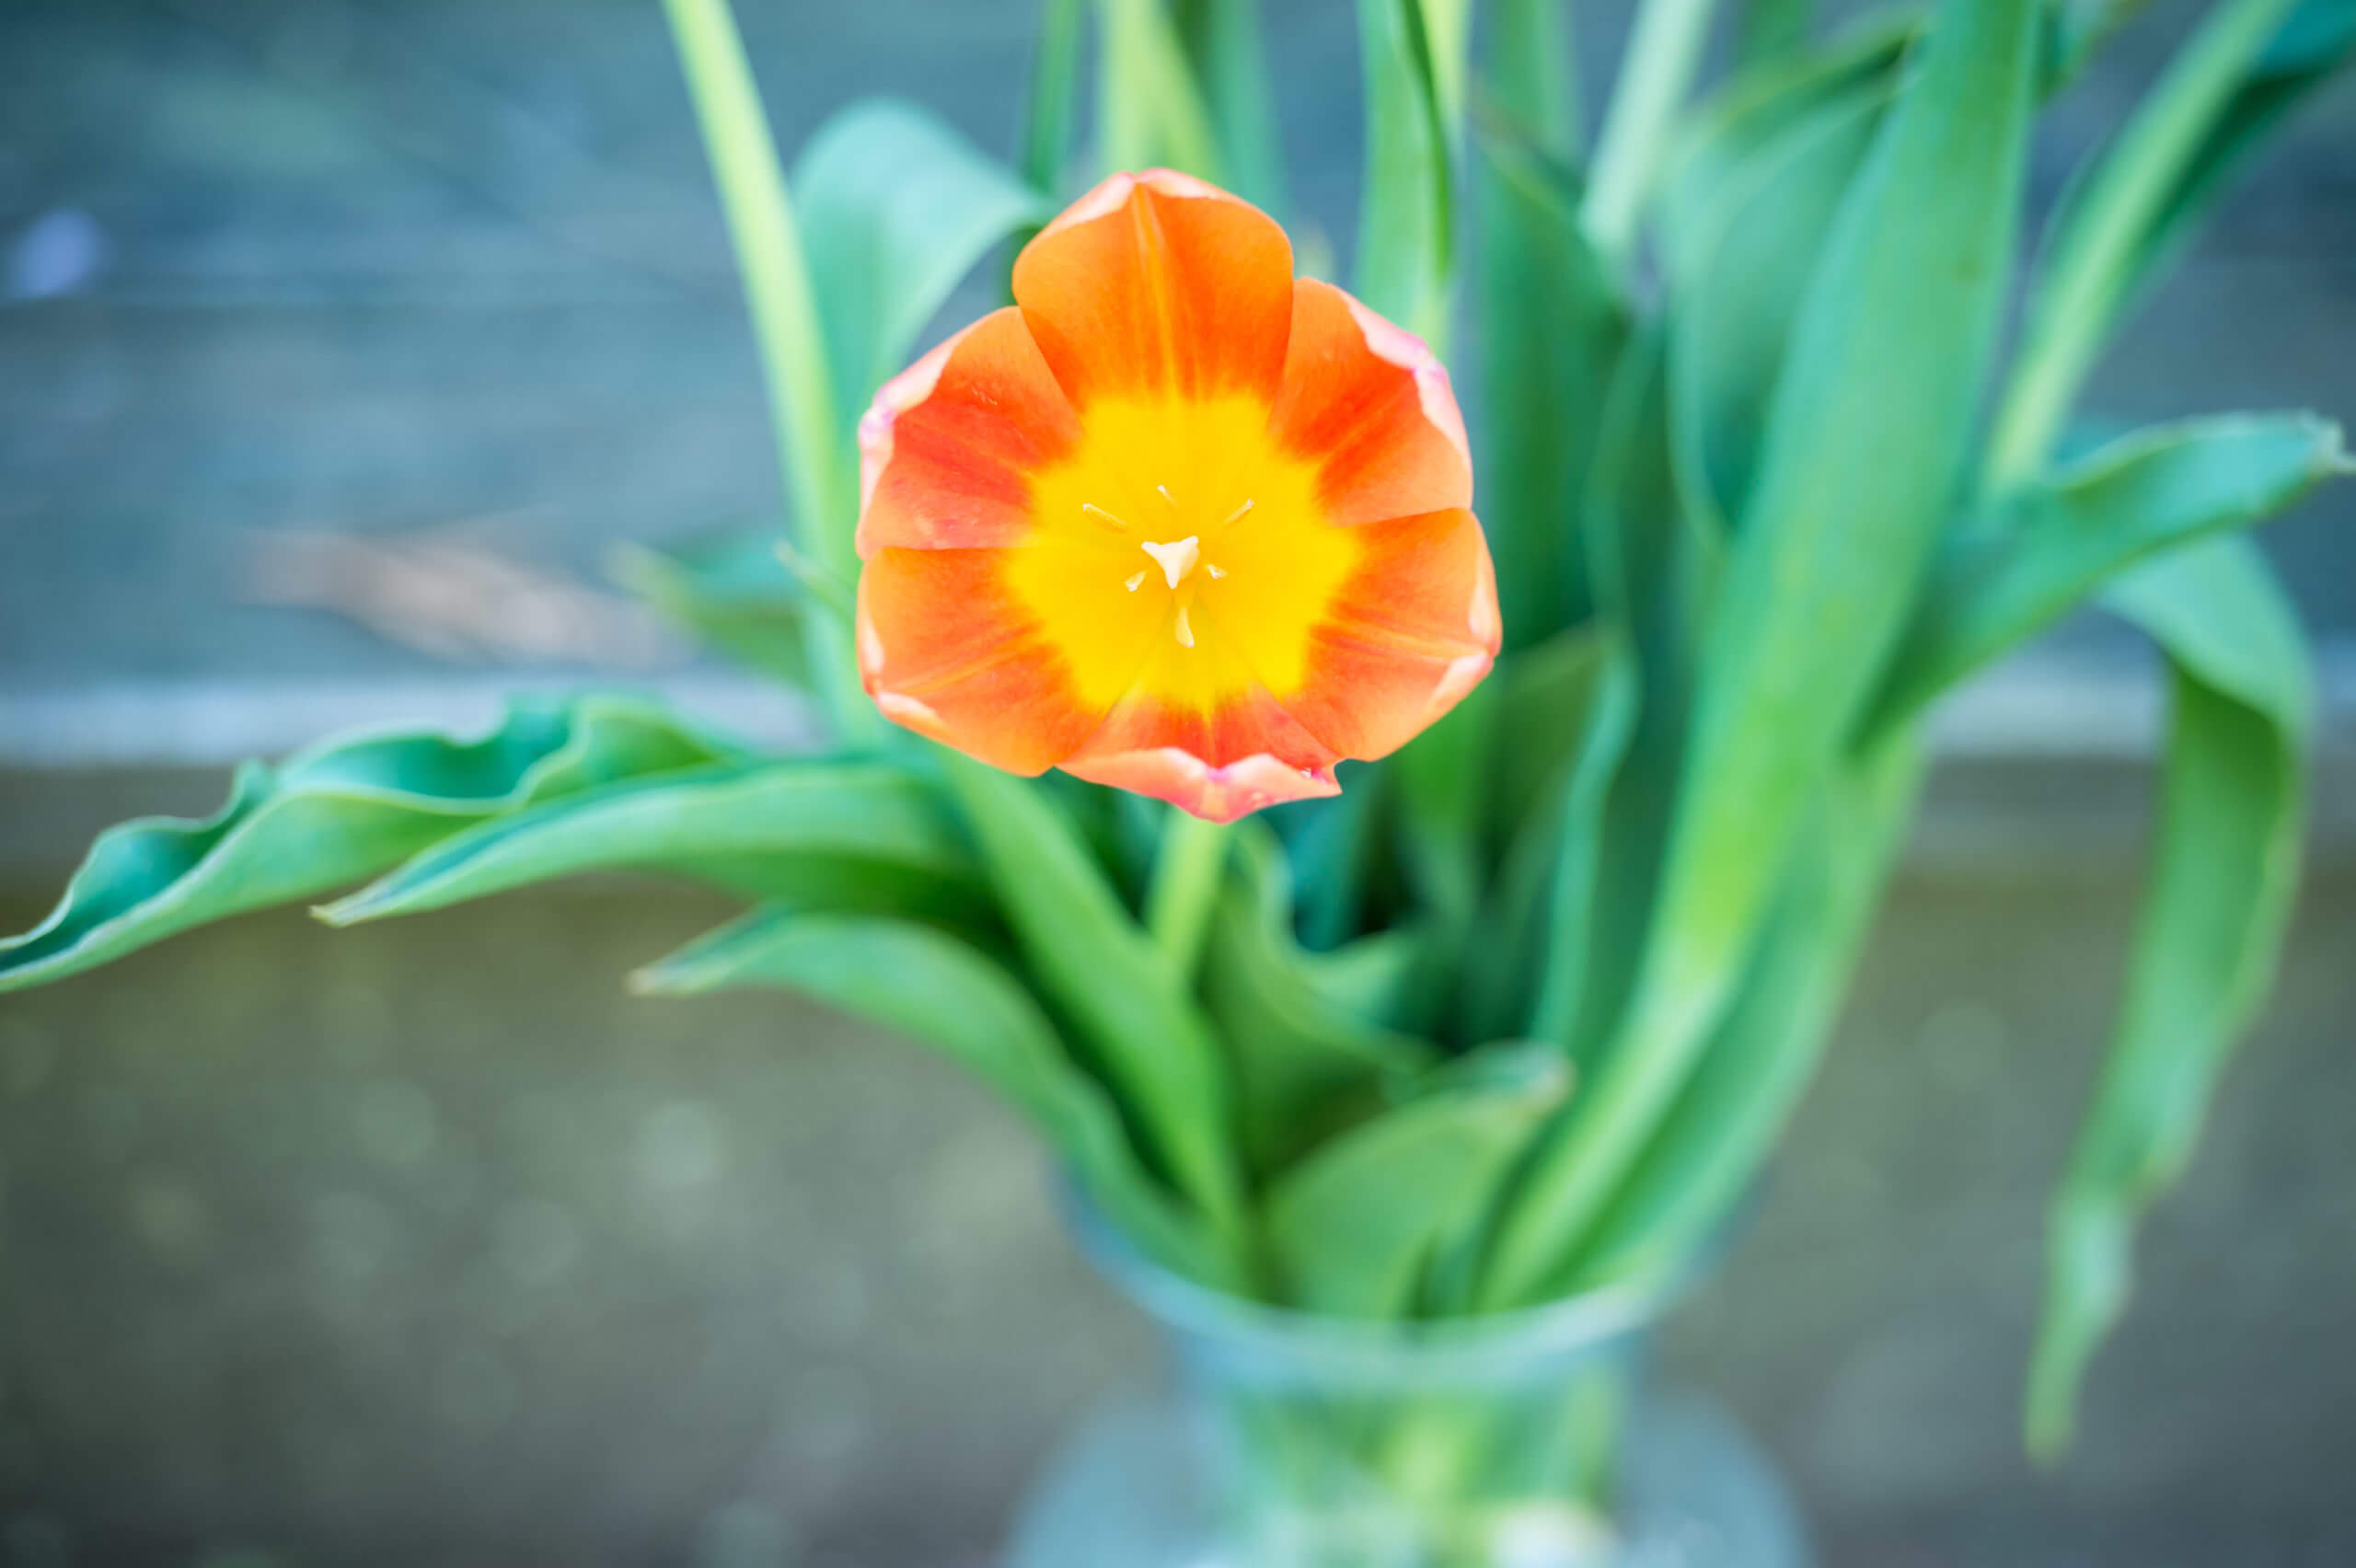 A vase of tulips. The inside of a single bloom is shown.